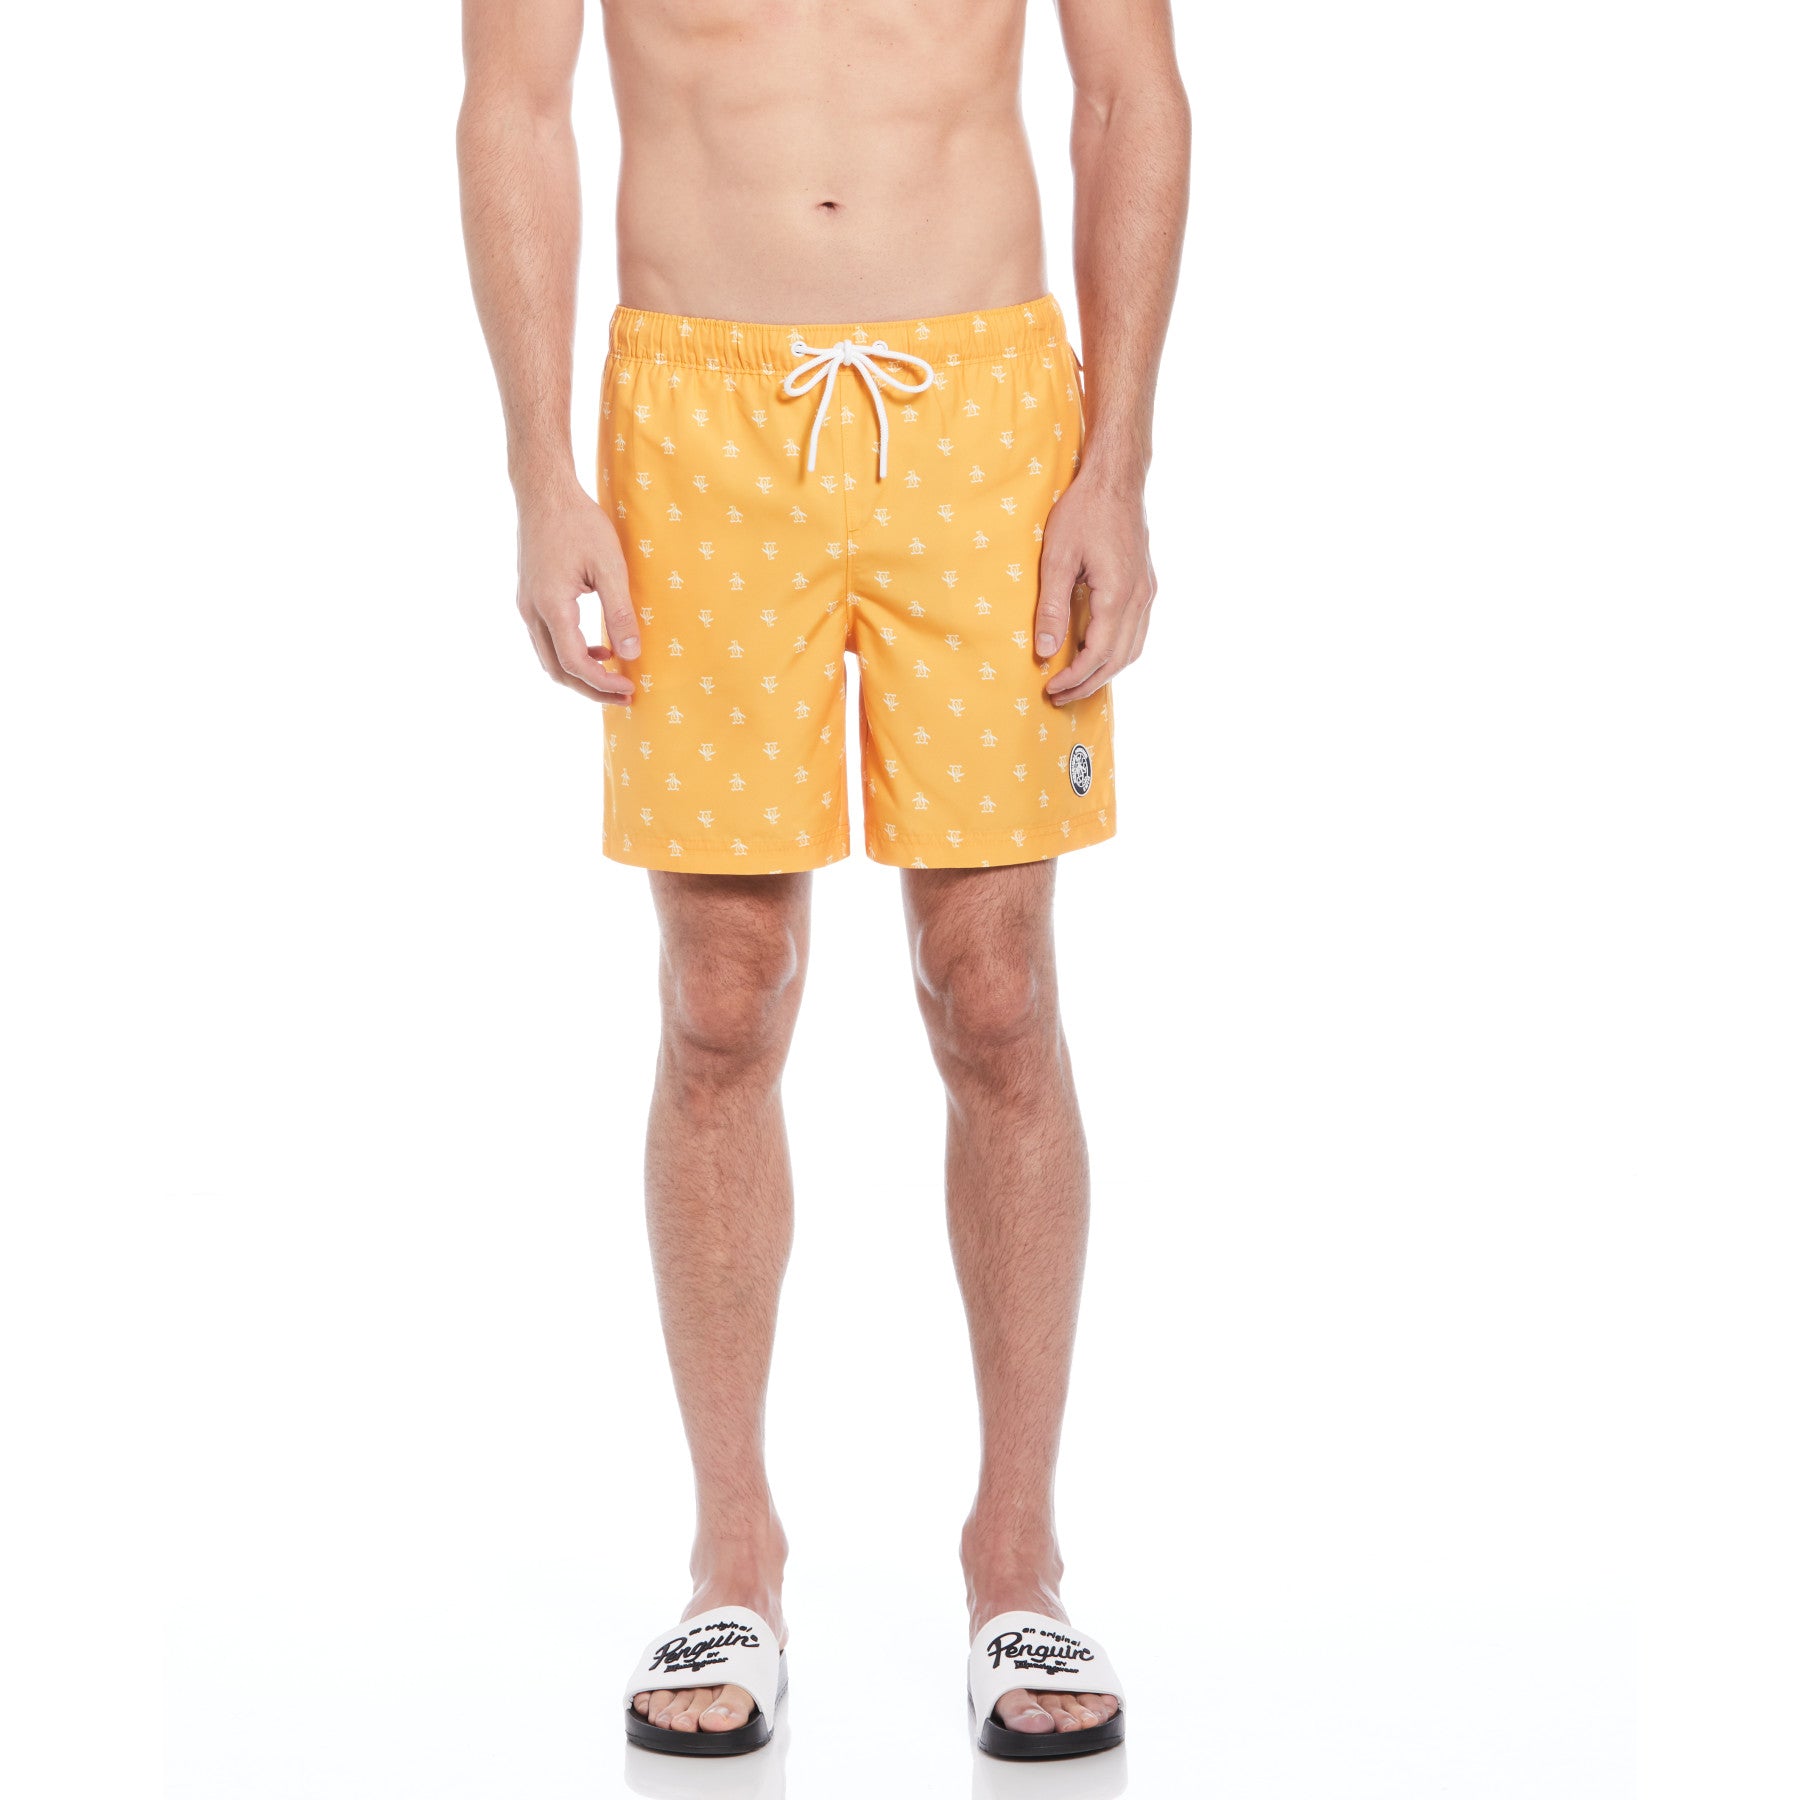 View Repete Print Swim Shorts In Butterscotch information